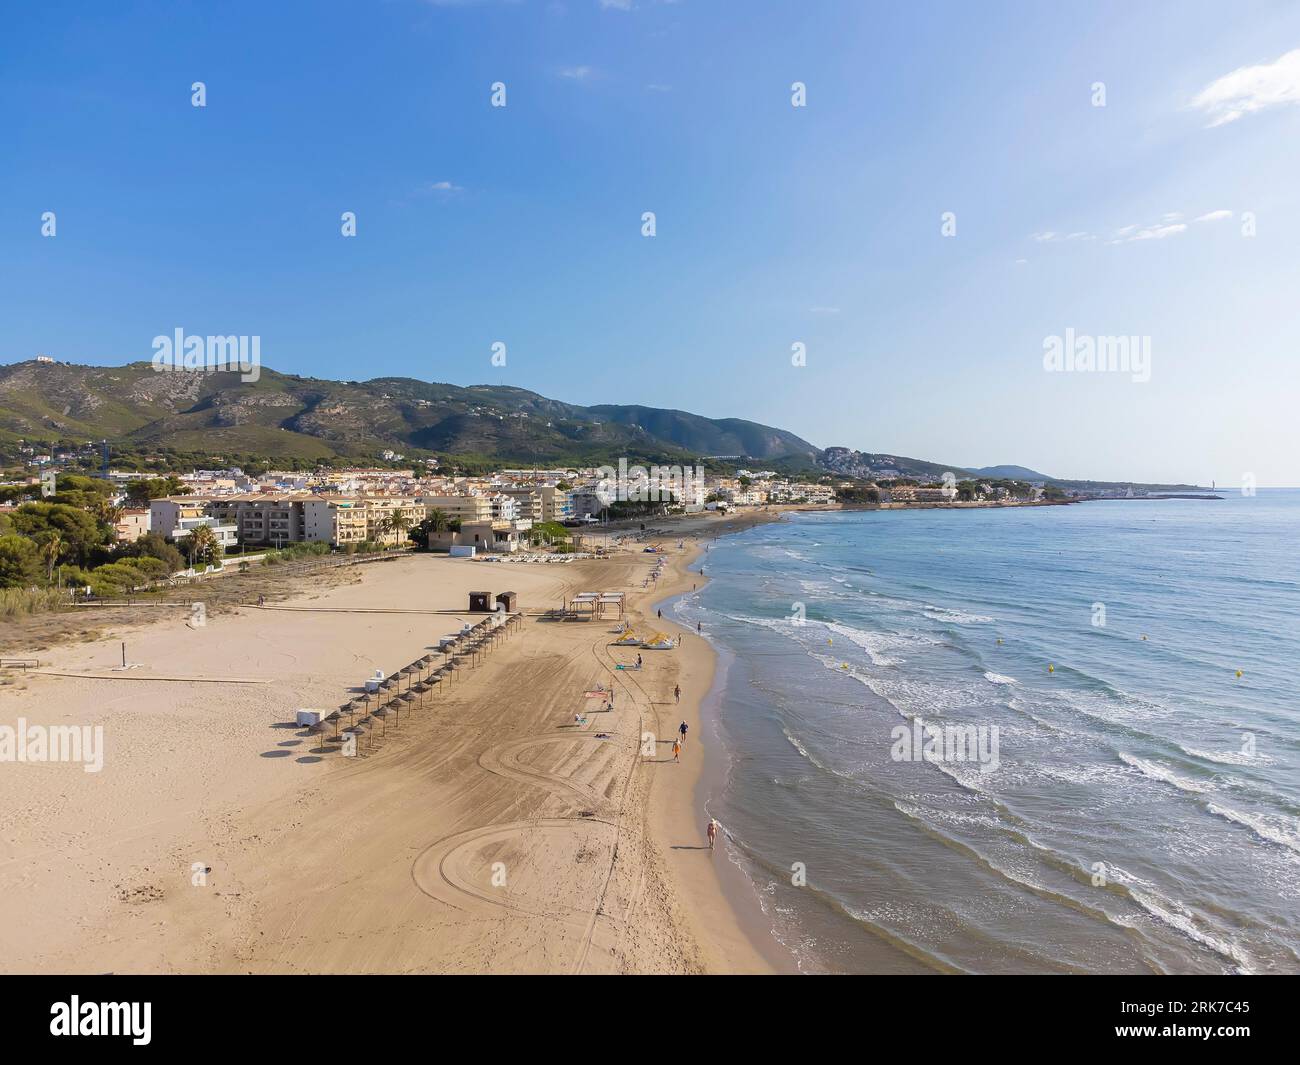 drone view of the beach of El Cargador in Alcober with the Sierra de Irta Natural Park in the background, aerial view, horizontal Stock Photo